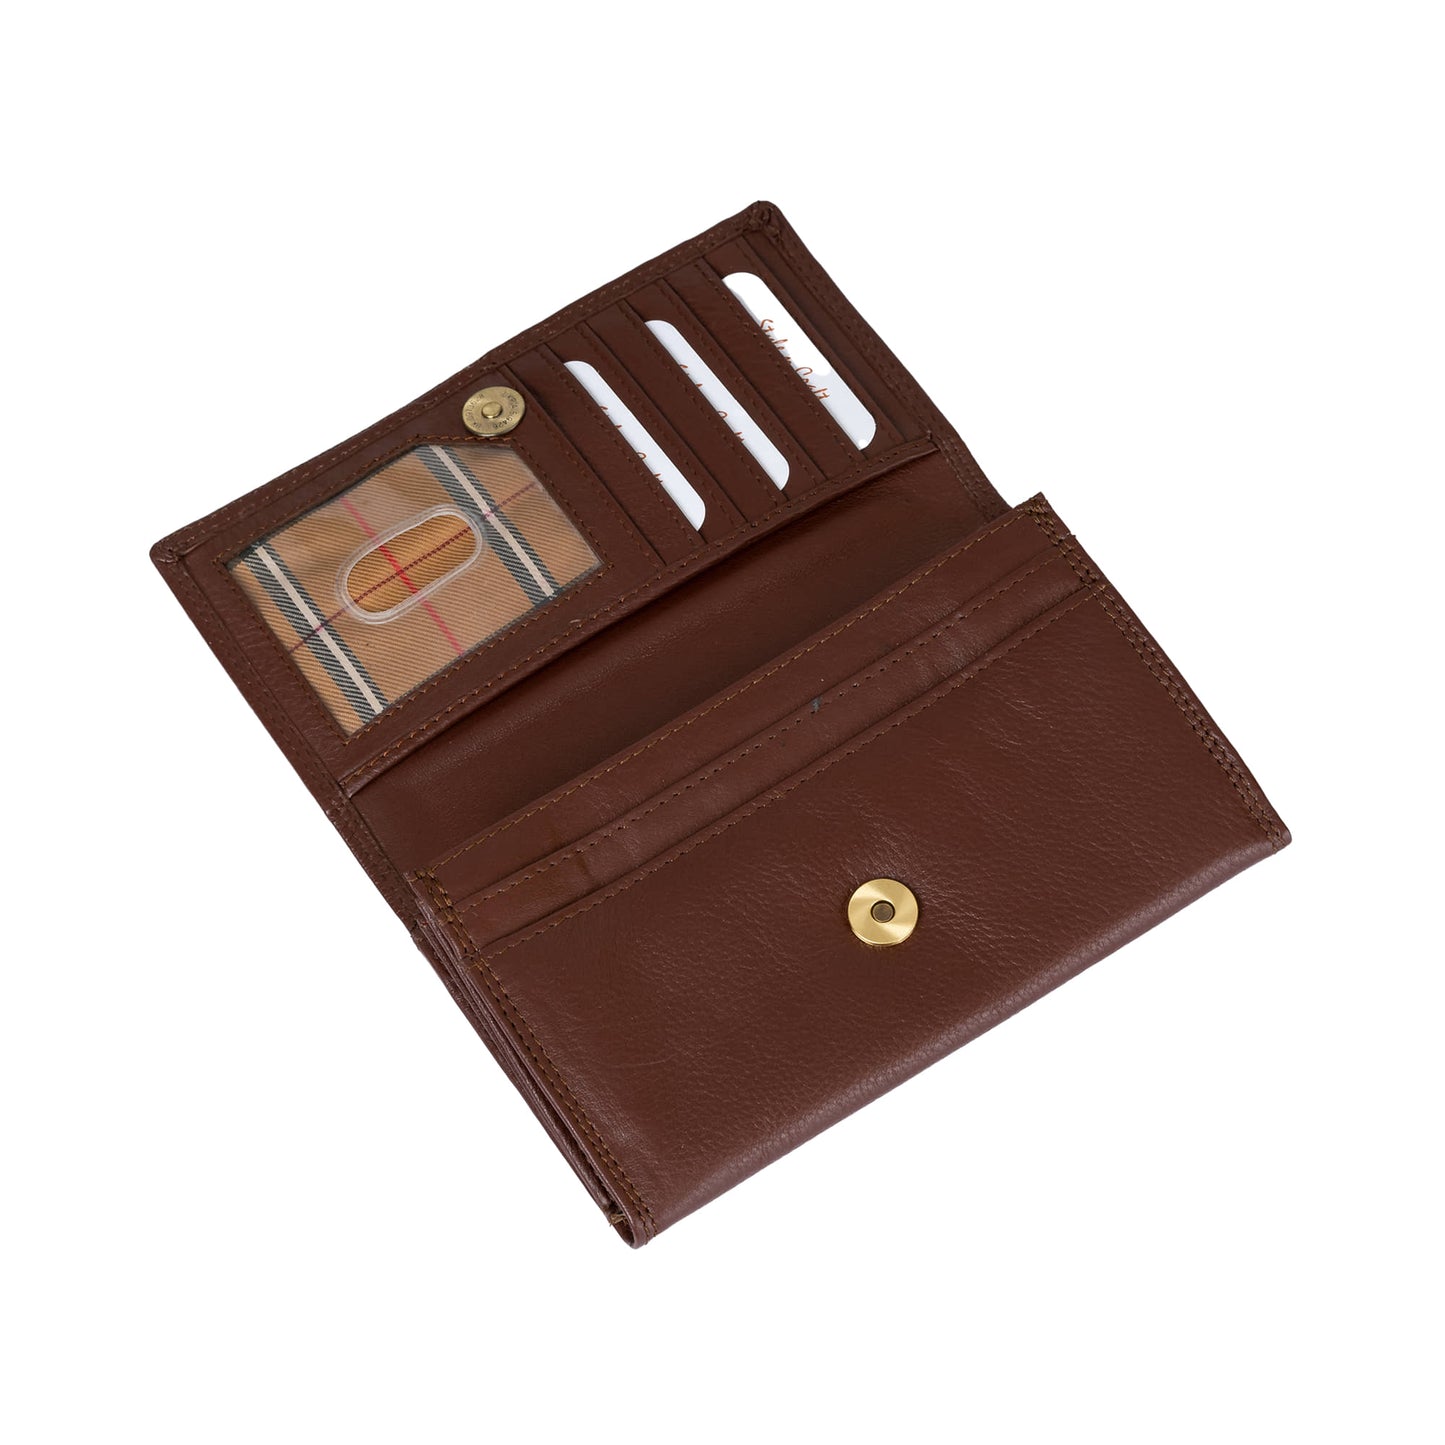 Style n Craft 391102 Ladies Clutch Wallet in Brown Full Grain Leather - Open View 2 - Showing the ID Window, Credit Card Pockets,  Long Pockets & the Magnetic Button for Closing